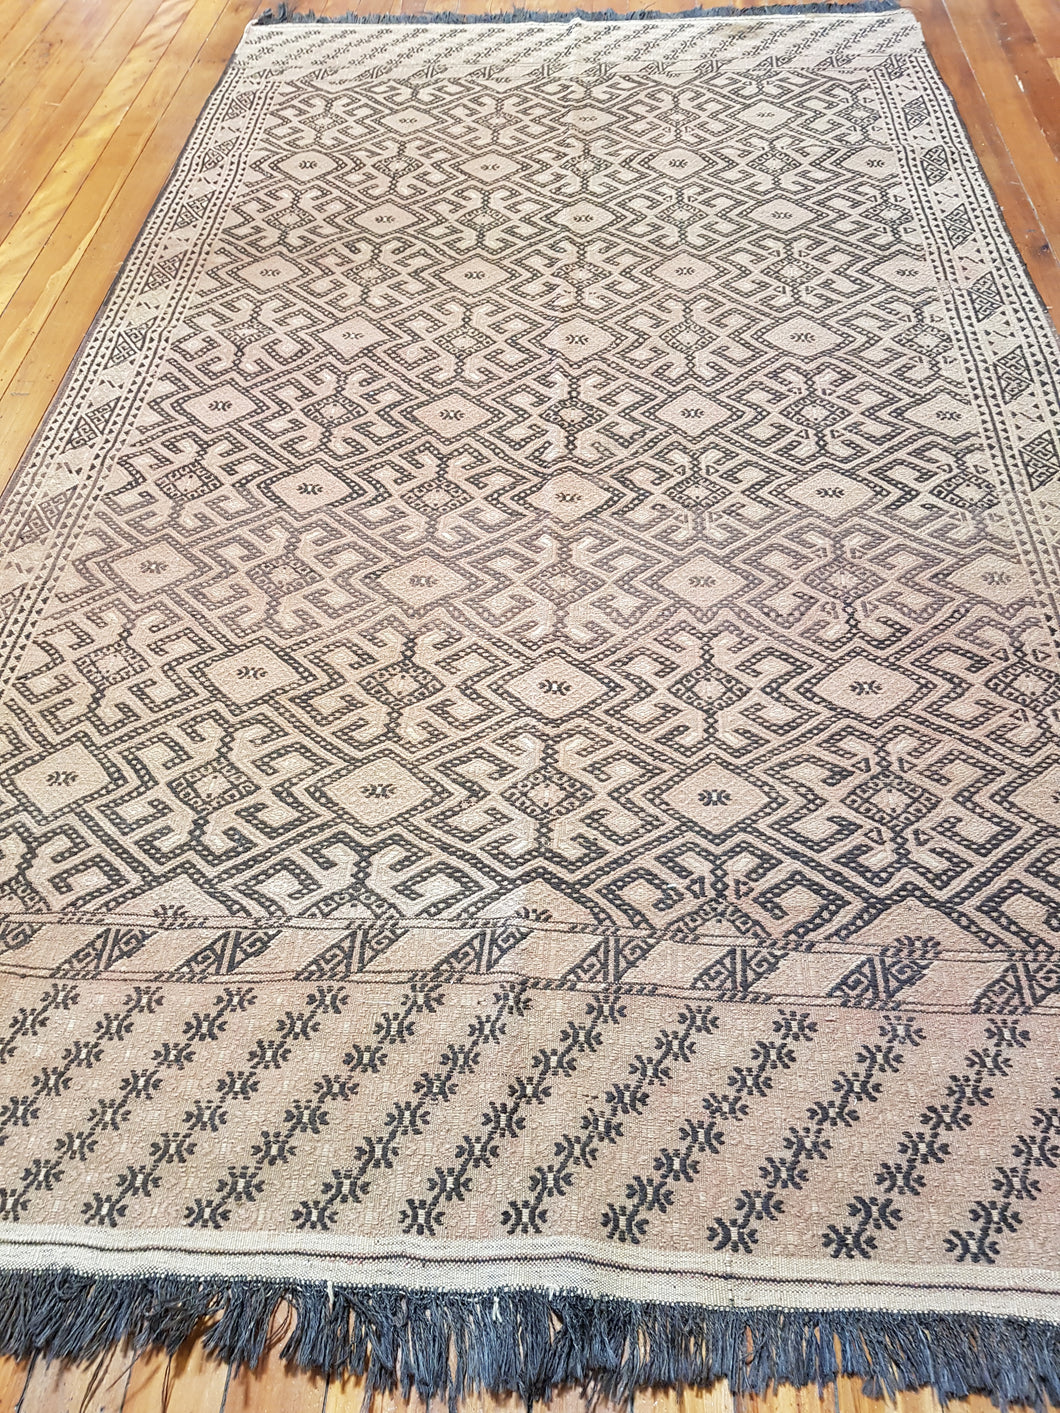 Hand knotted wool Rug 7224 size 303 x 180 cm Afghanistan